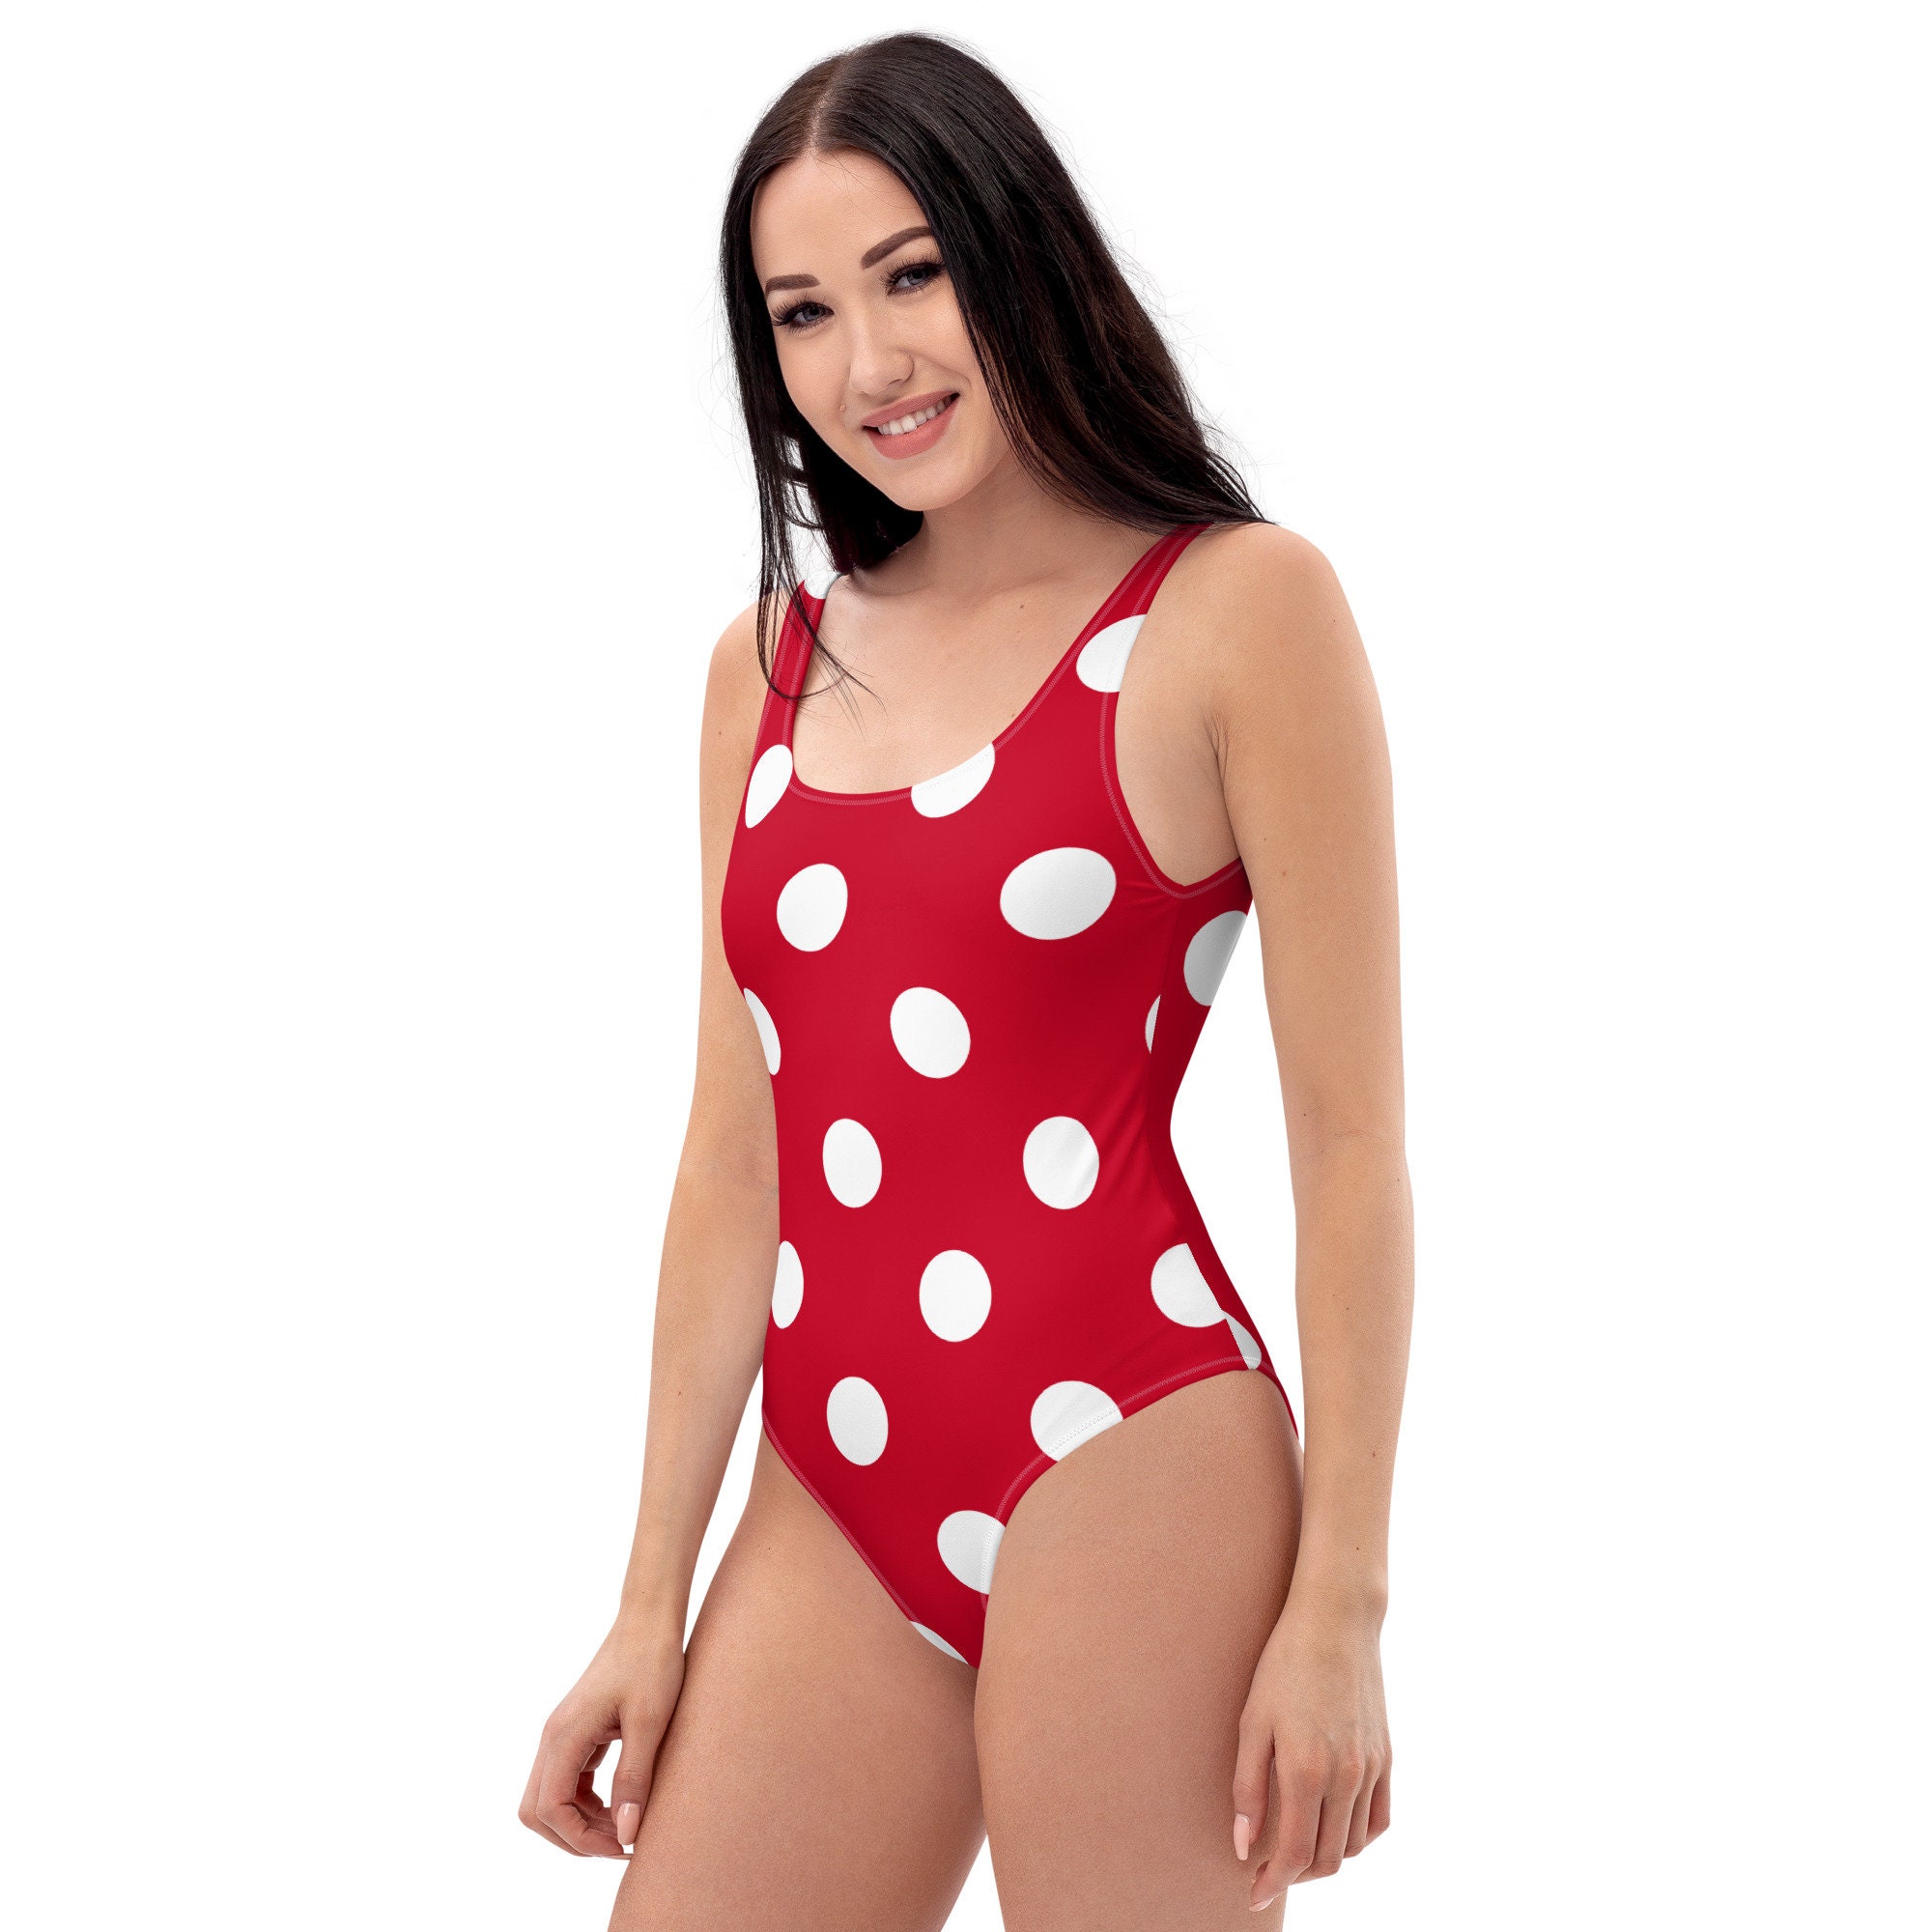 Mr. Mouse red polka dots swimsuit, Disney Vacation outfit